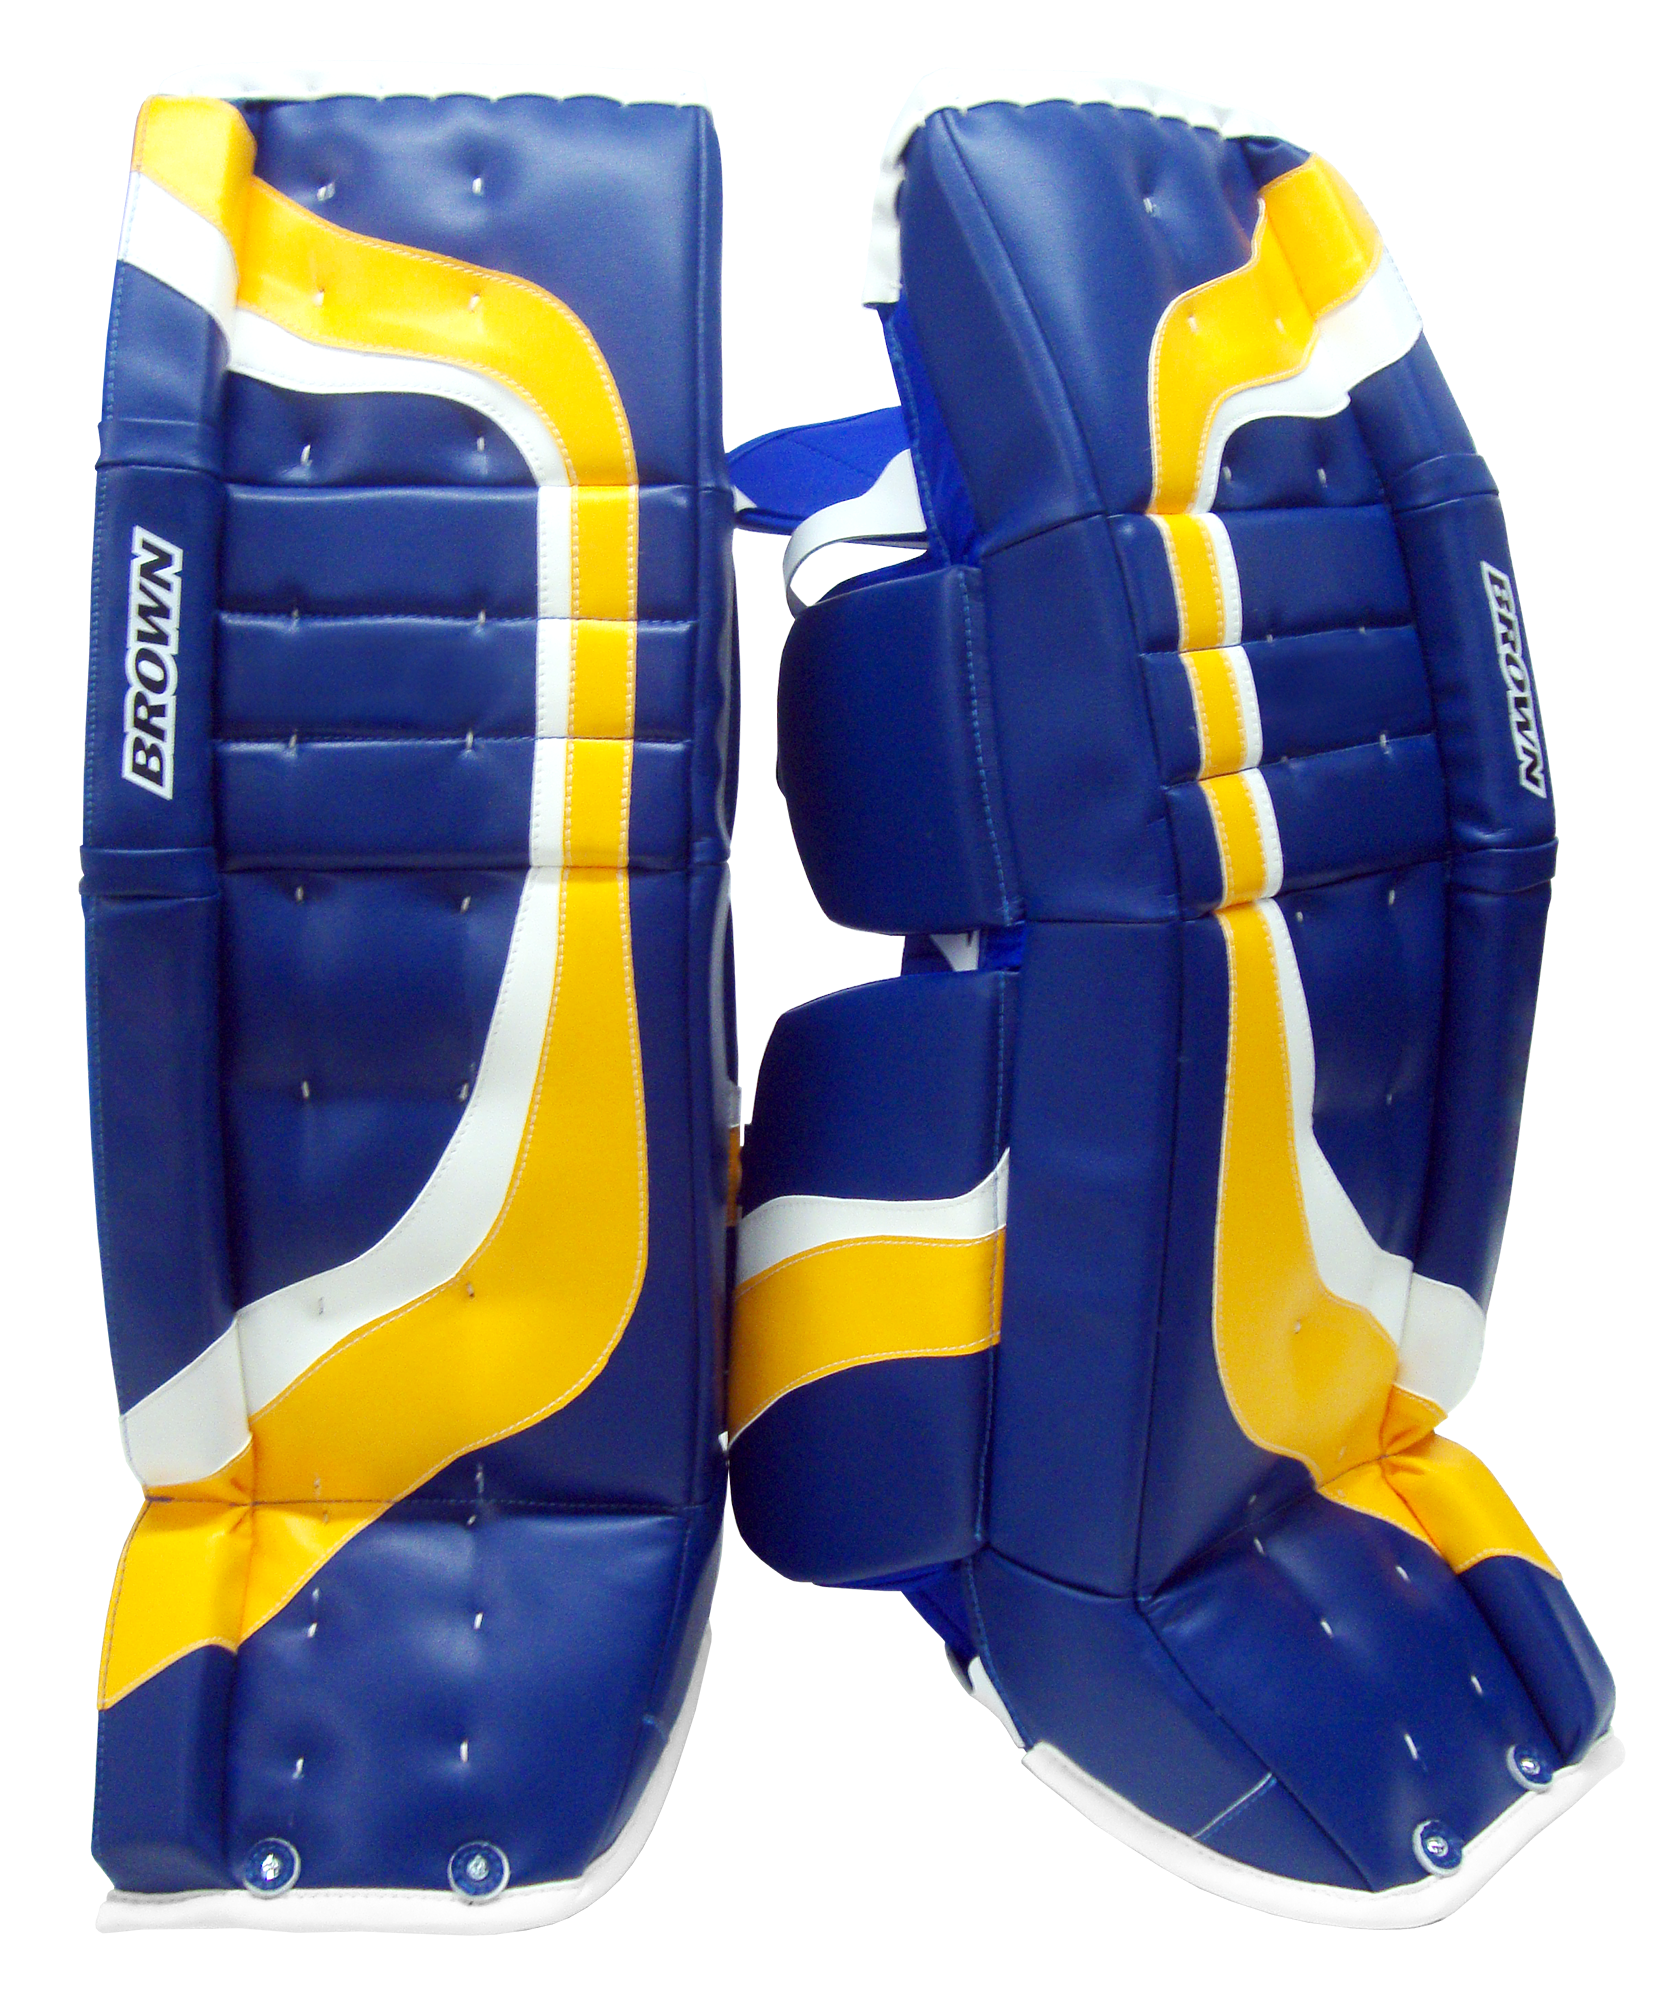 Front of 2200 leg pads